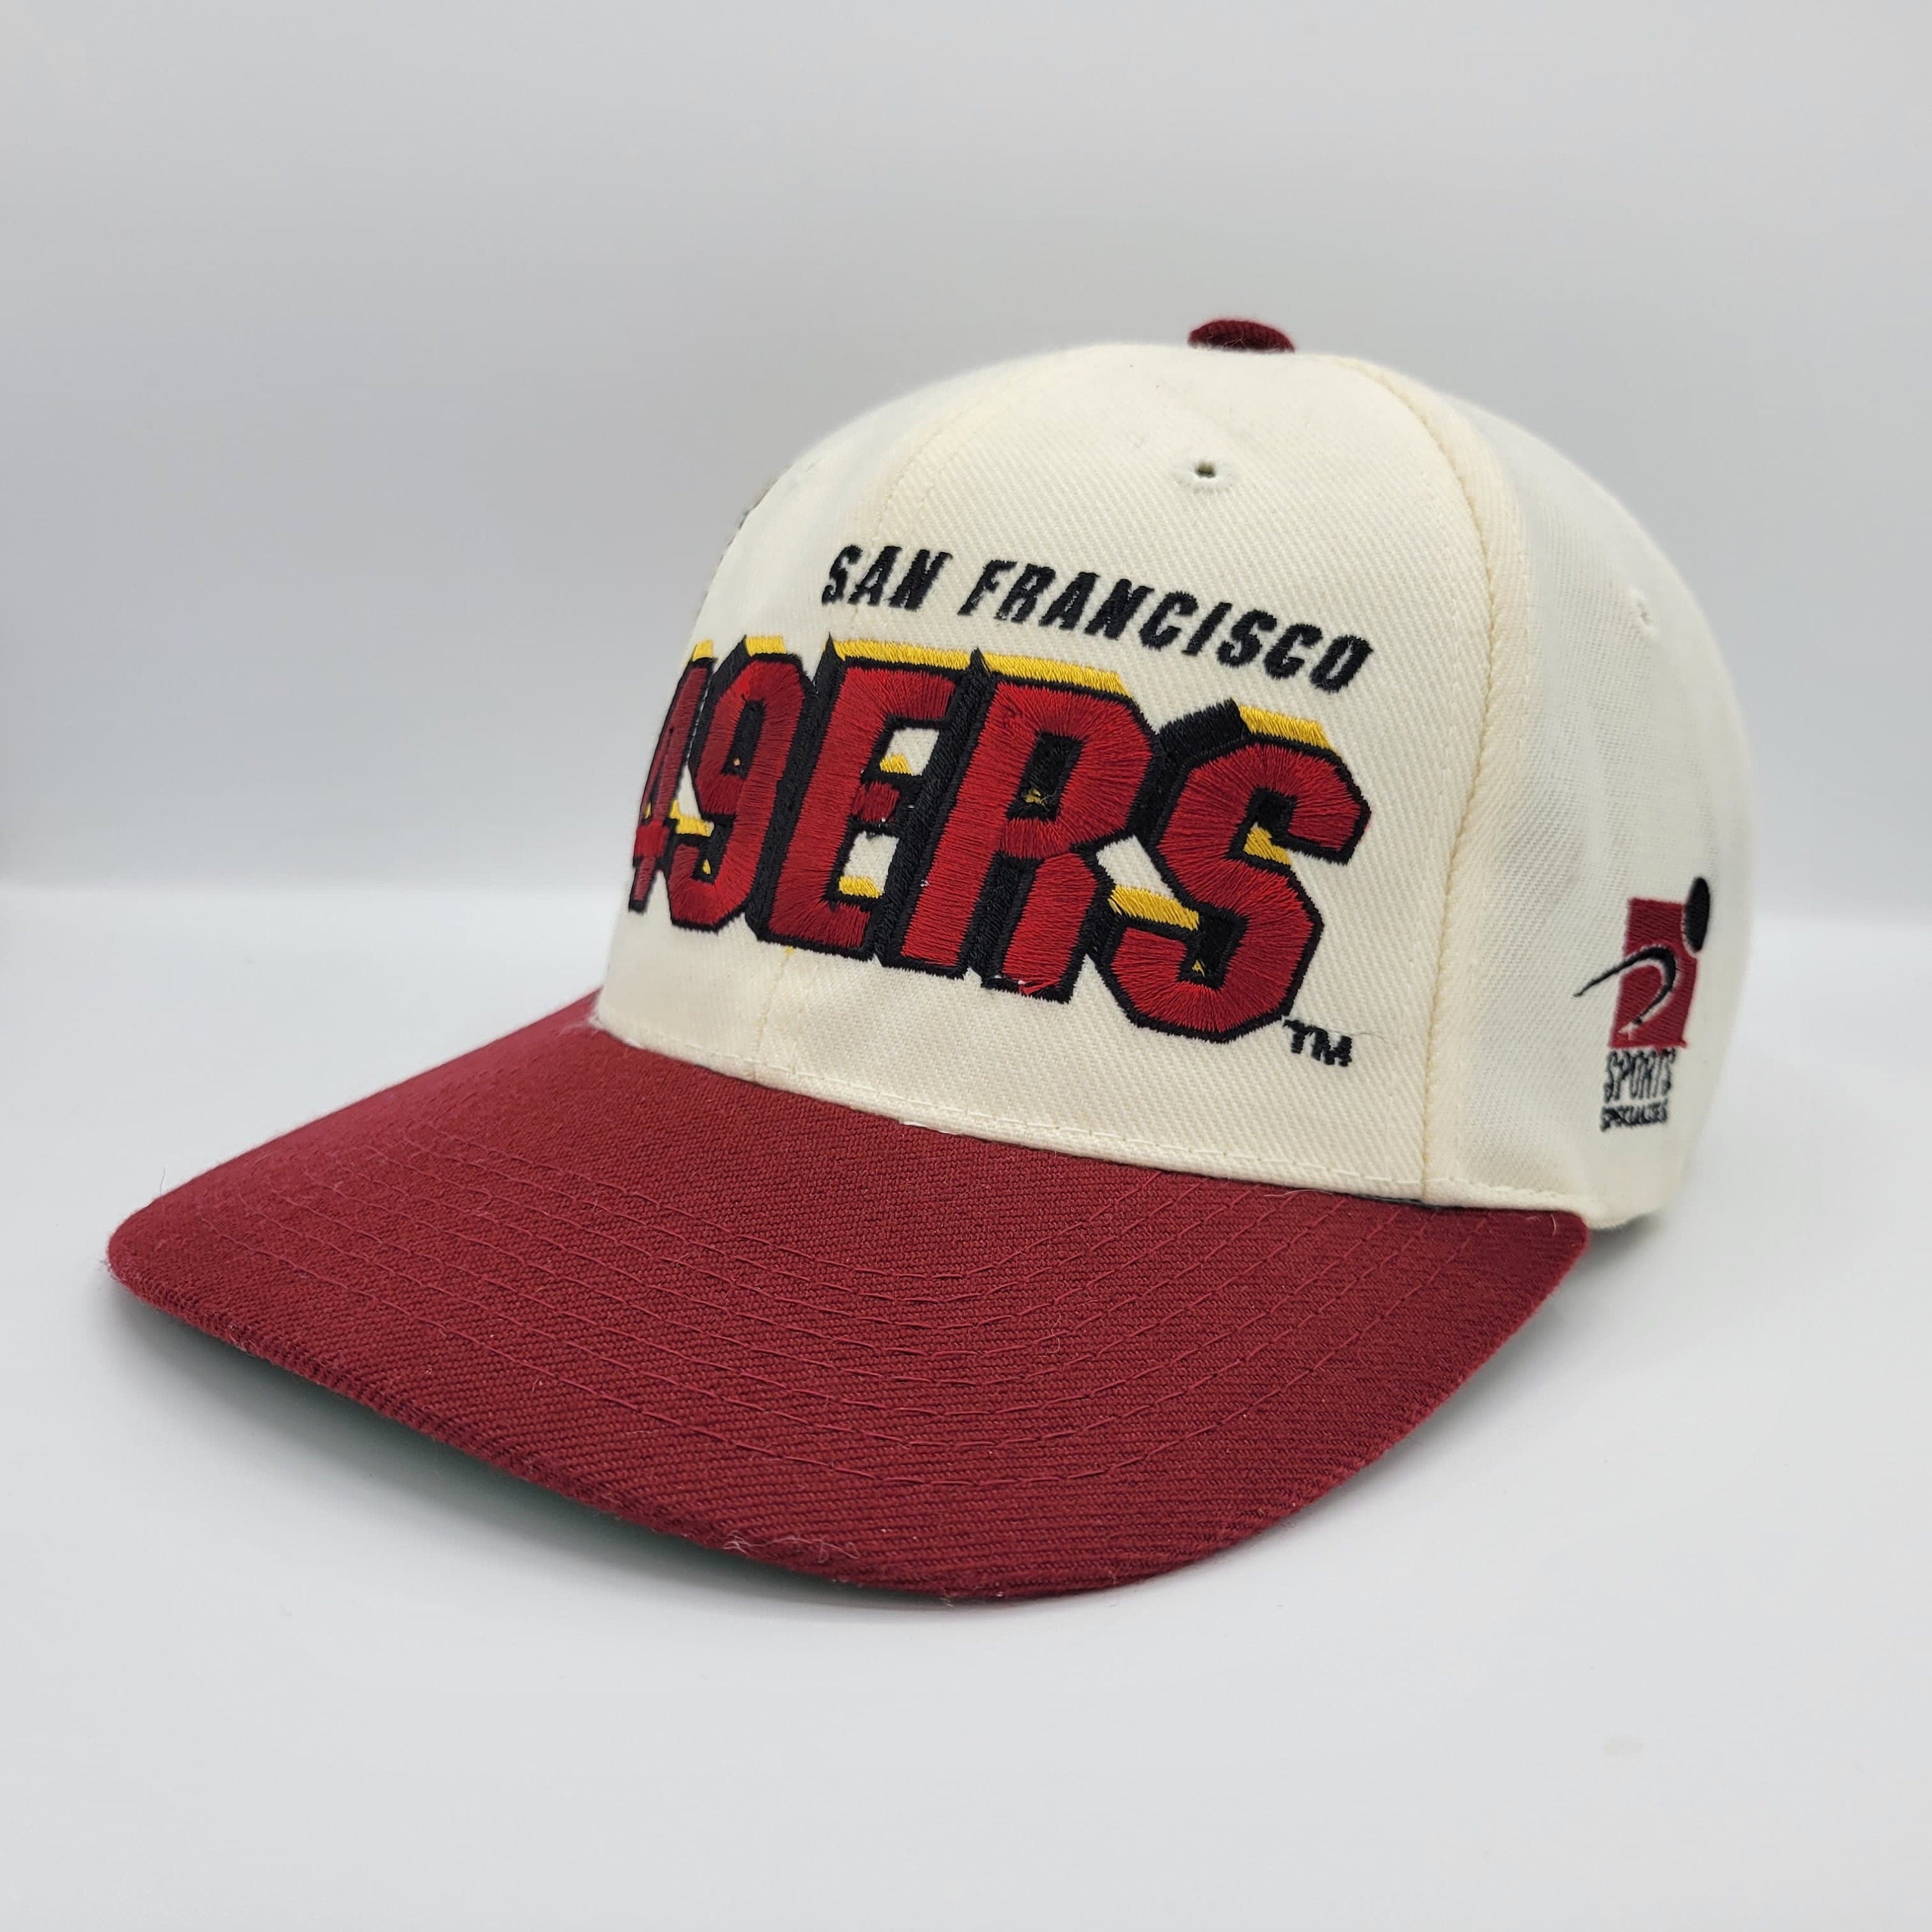 Some of the retro #49ers hats at NFL Shop .. #FTTB